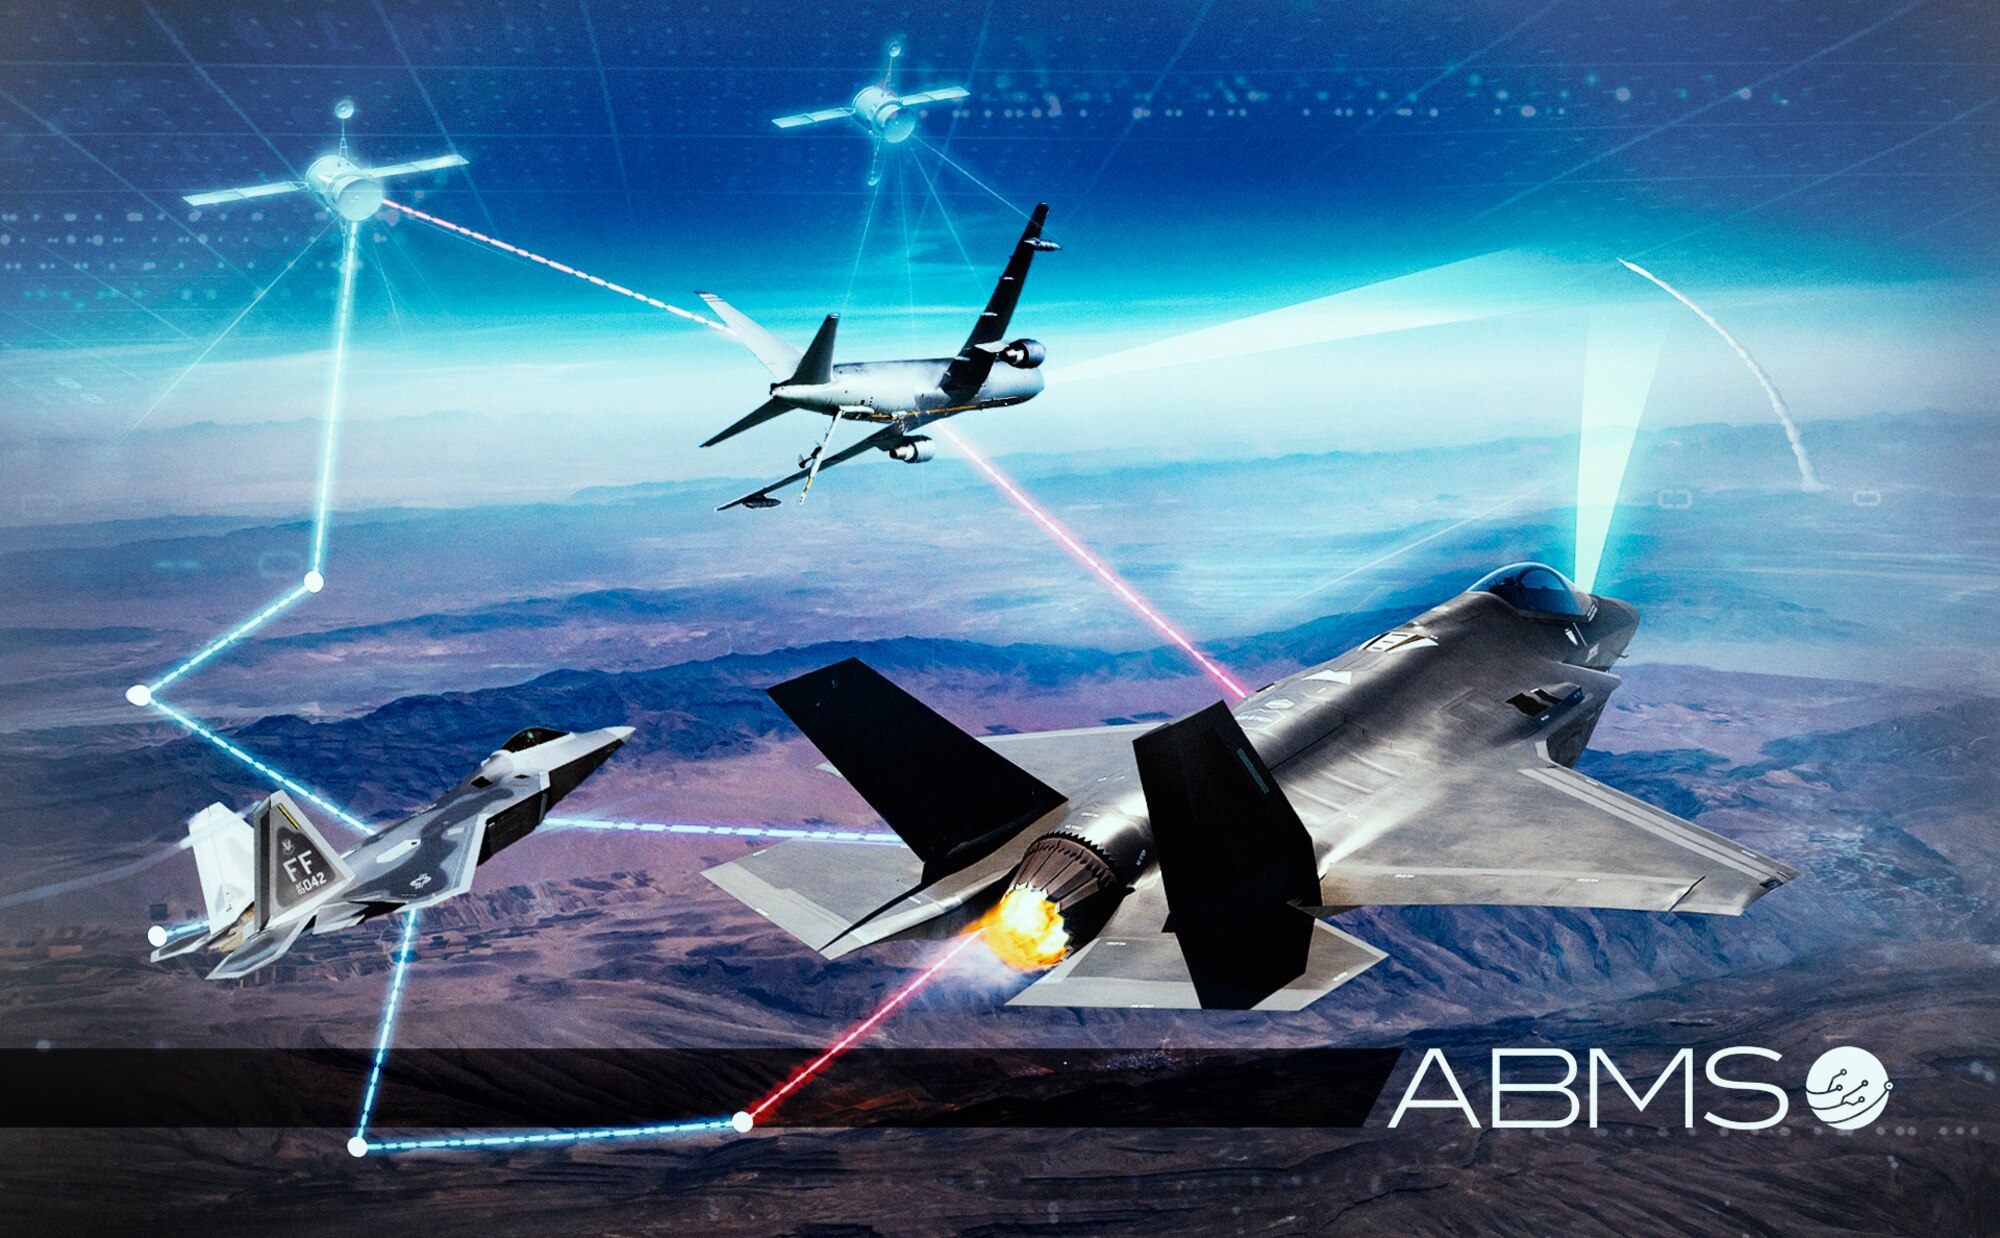 In this concept graphic, a communications pod installed in a KC-46 Pegasus will allow the F-35 Lightning II and F-22 Raptor to connect and instantly receive and transmit the most up-to-date information to ensure the warfighters maintain decision superiority. The Advanced Battle Management System is the Department of the Air Force’s contribution to Joint All-Domain Command and Control, the Department of Defense effort to digitally connect all elements of the U.S. military across air, land, sea, space, and cyberspace. In summer 2021, the Department of the Air Force Rapid Capabilities Office, headquartered in Washington D.C., stood up the ABMS Program Executive Office Integration Team at Hanscom Air Force Base, Mass., to bring together acquisition directorate personnel to leverage their developed capabilities for use in the ABMS. (U.S. Air Force graphic)